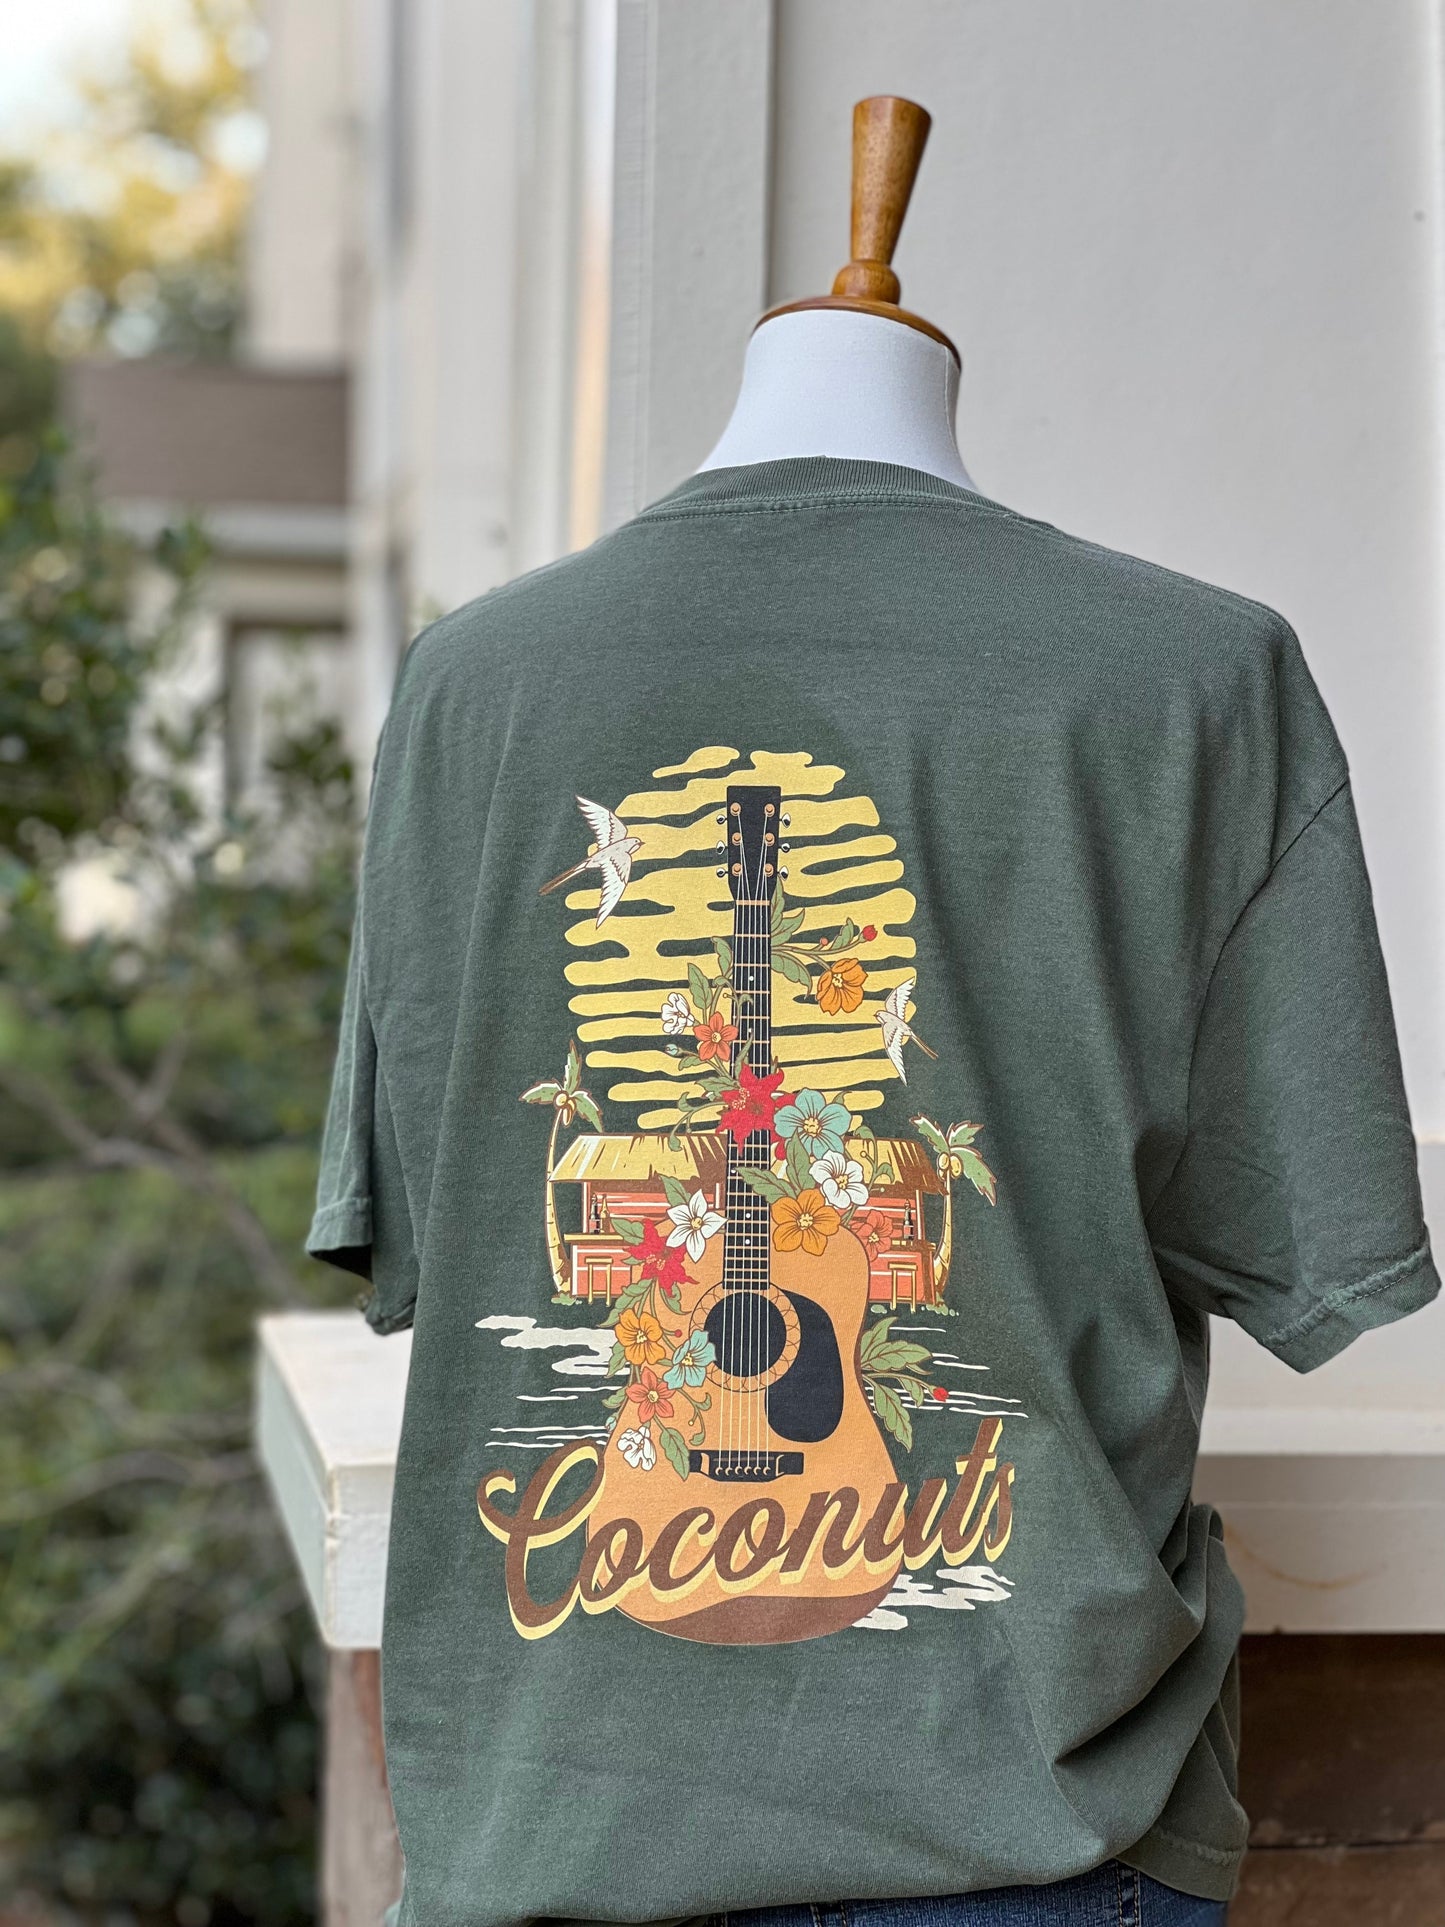 Widespread Panic "Coconuts" T-Shirt